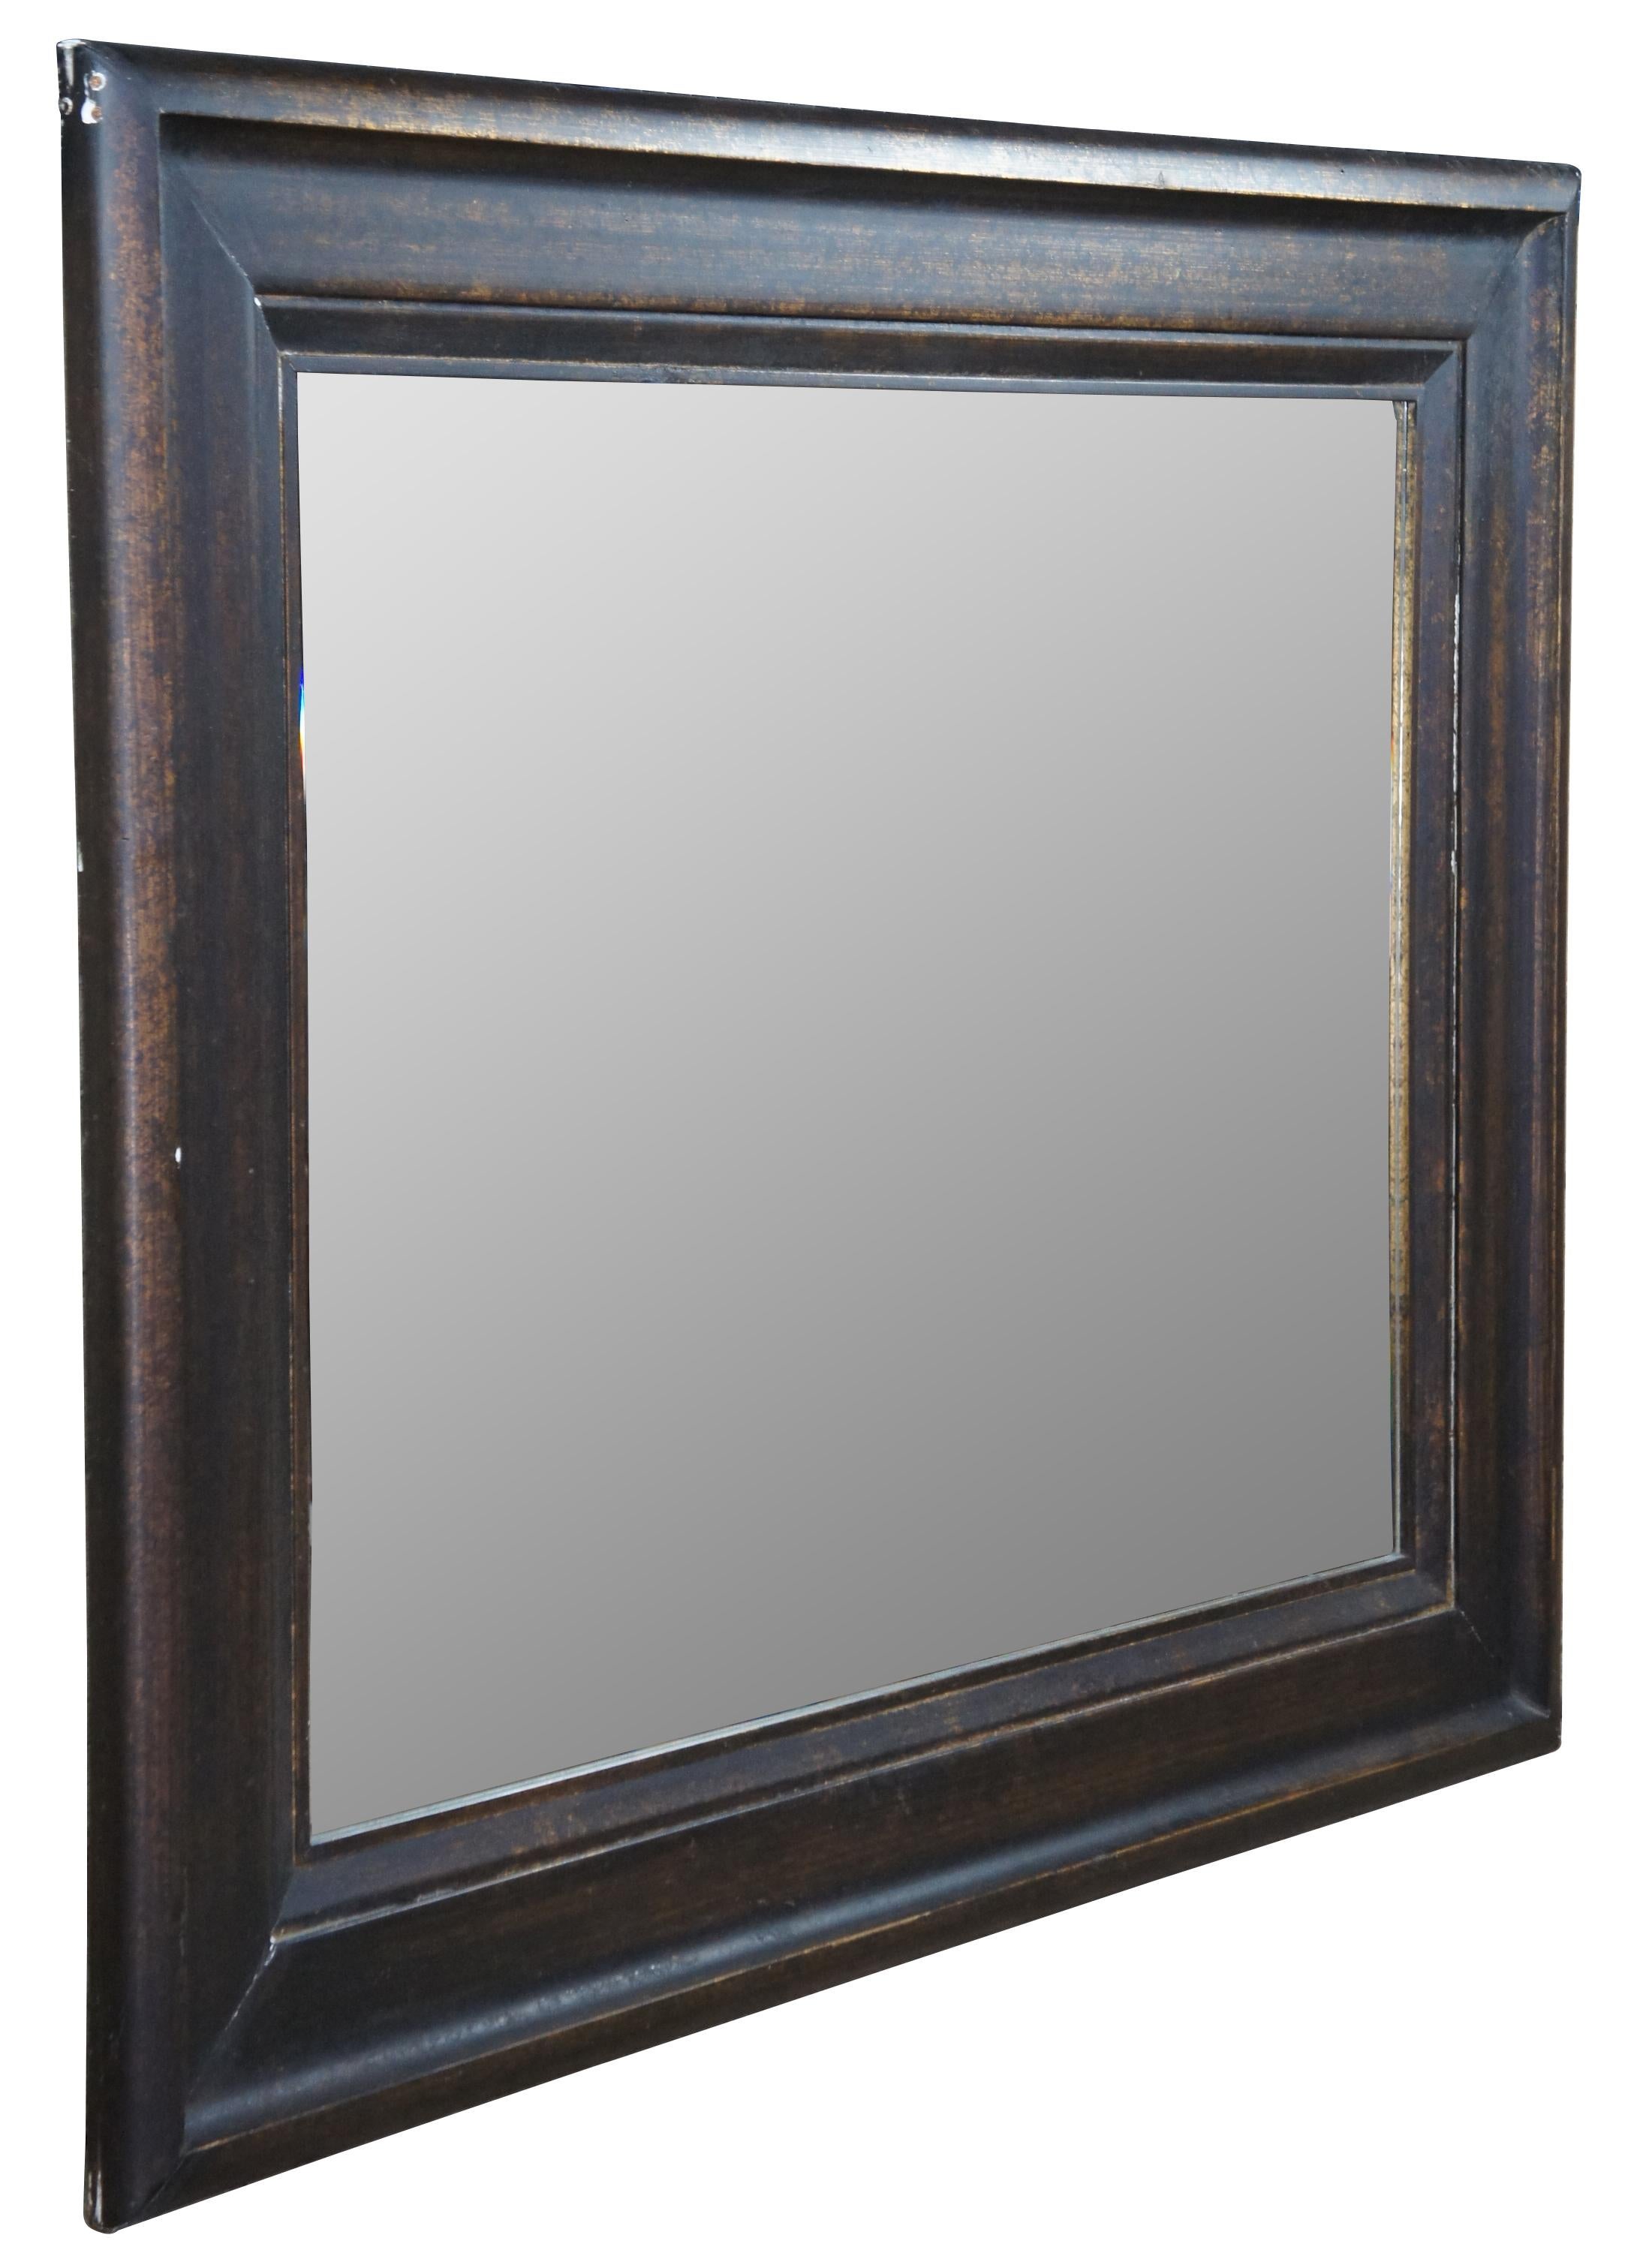 Oversized modern wall mirror. Great for user over a mantel/ along a wall. Black and gold mottled finish with beveled glass.

Measures: 50